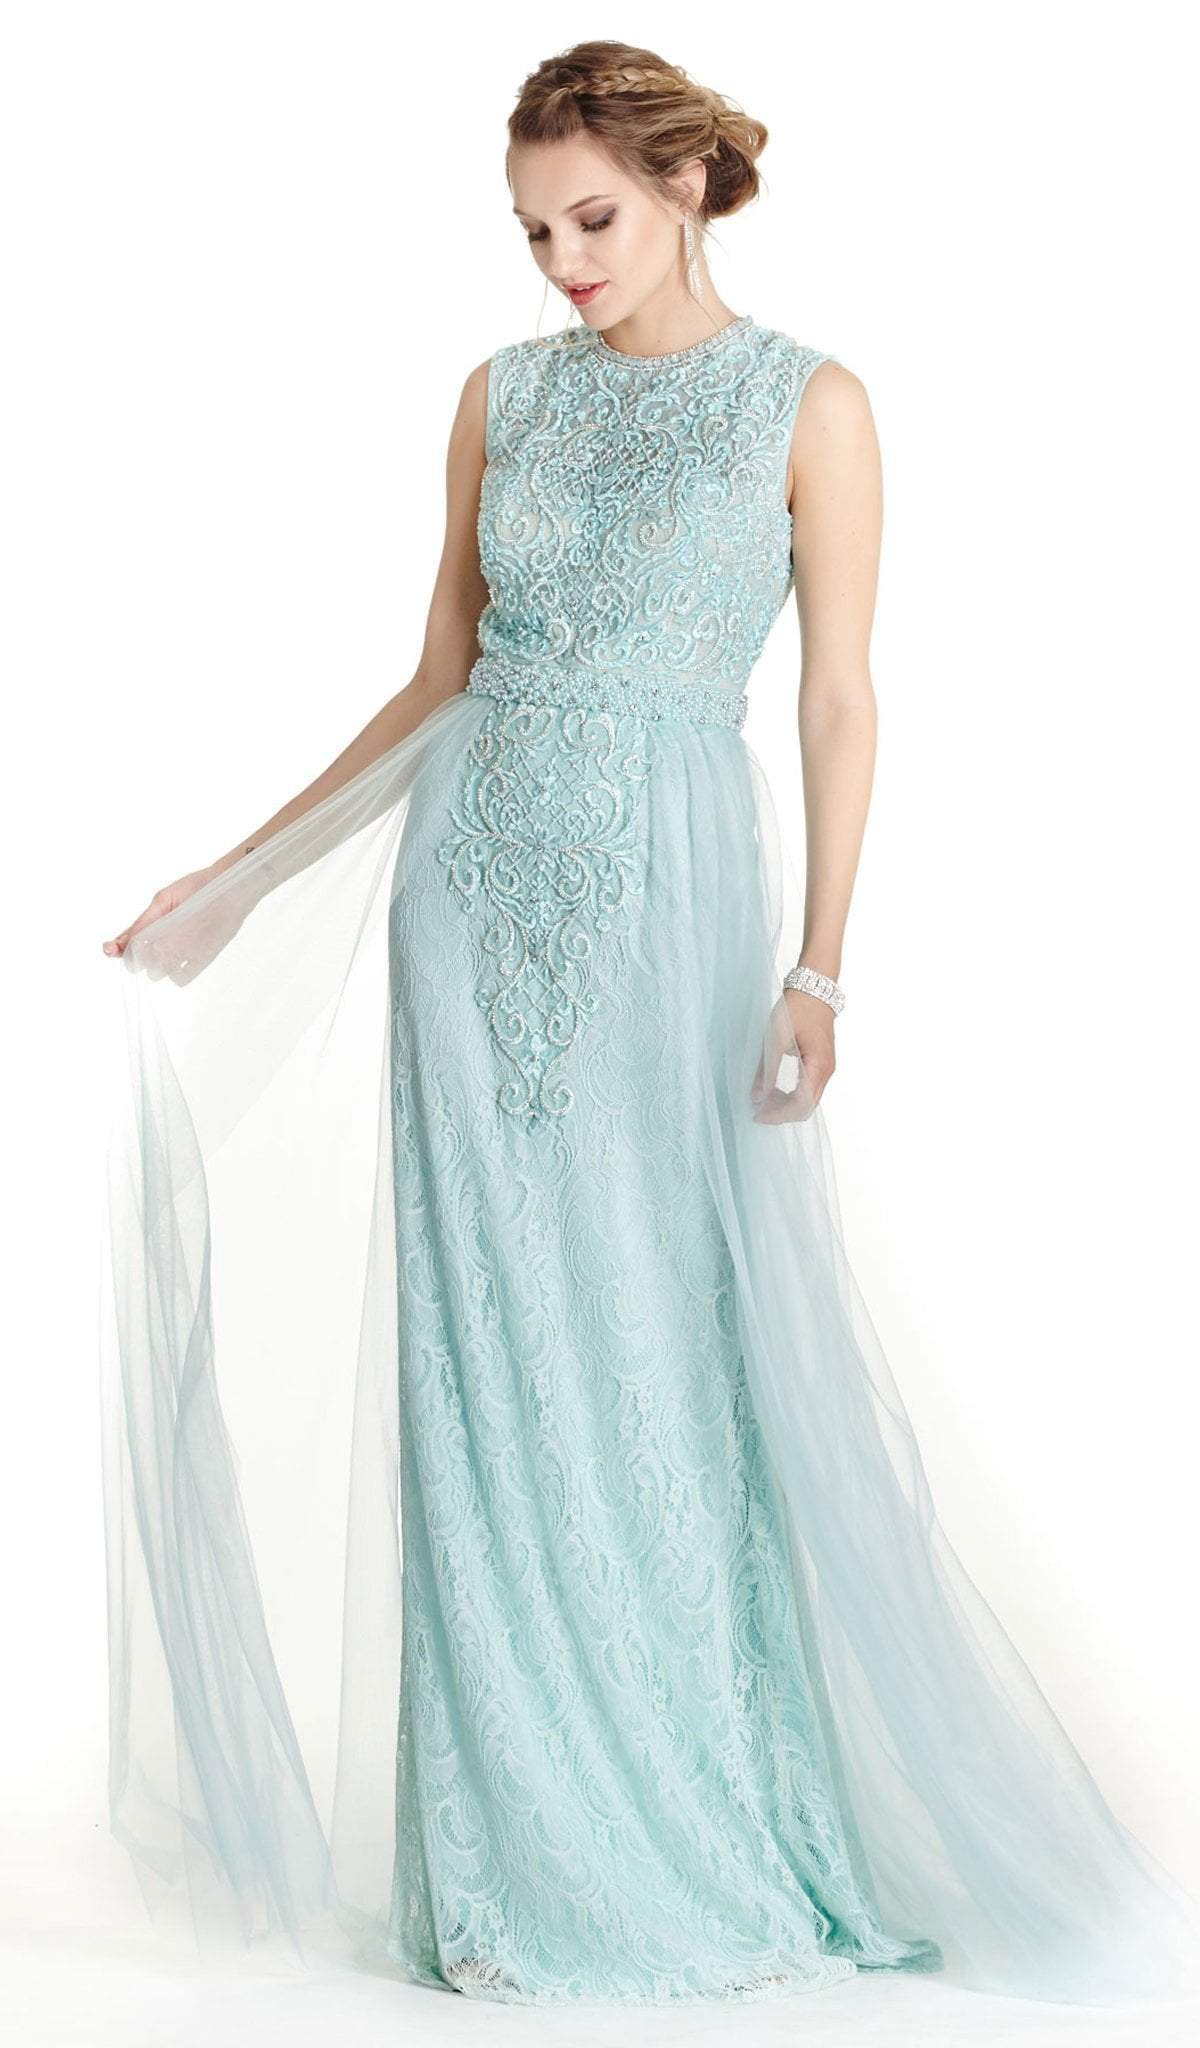 Image of Aspeed Design - Embroidered Jewel Neck A-line Prom Dress